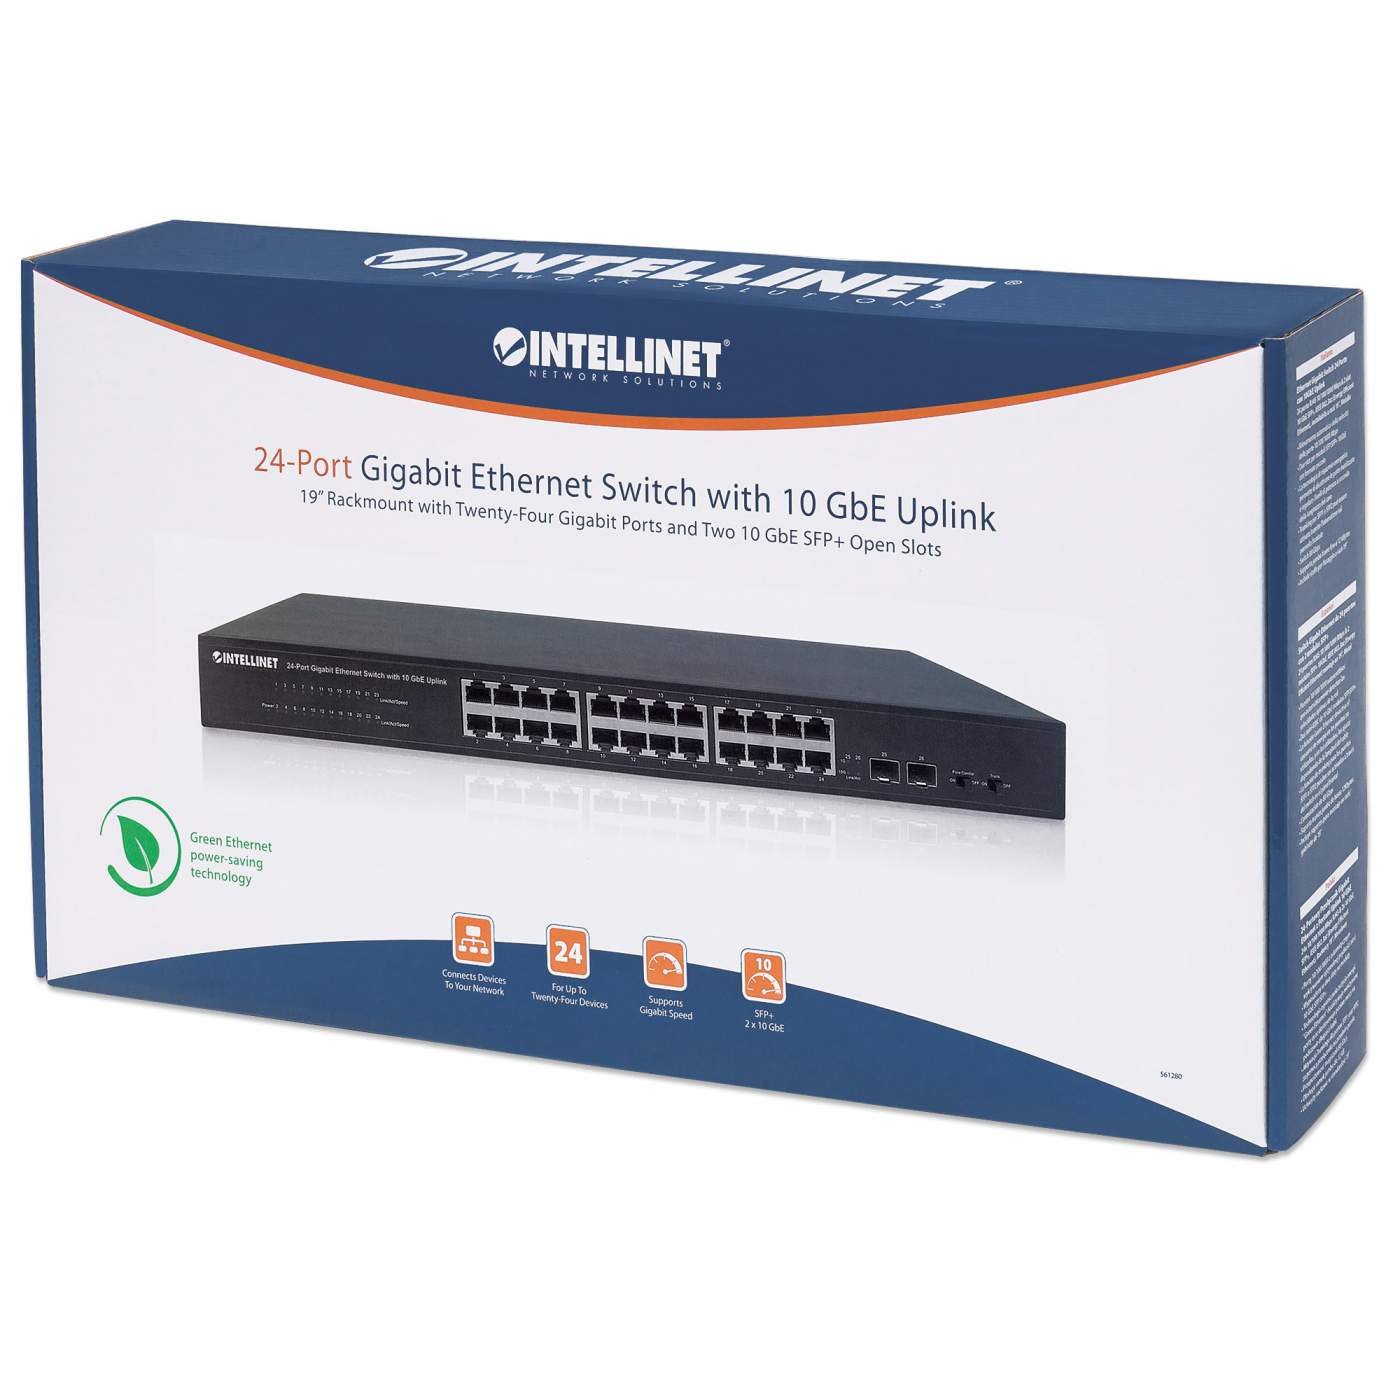 24-Port Gigabit Ethernet Switch with 10 GbE Uplink Packaging Image 2